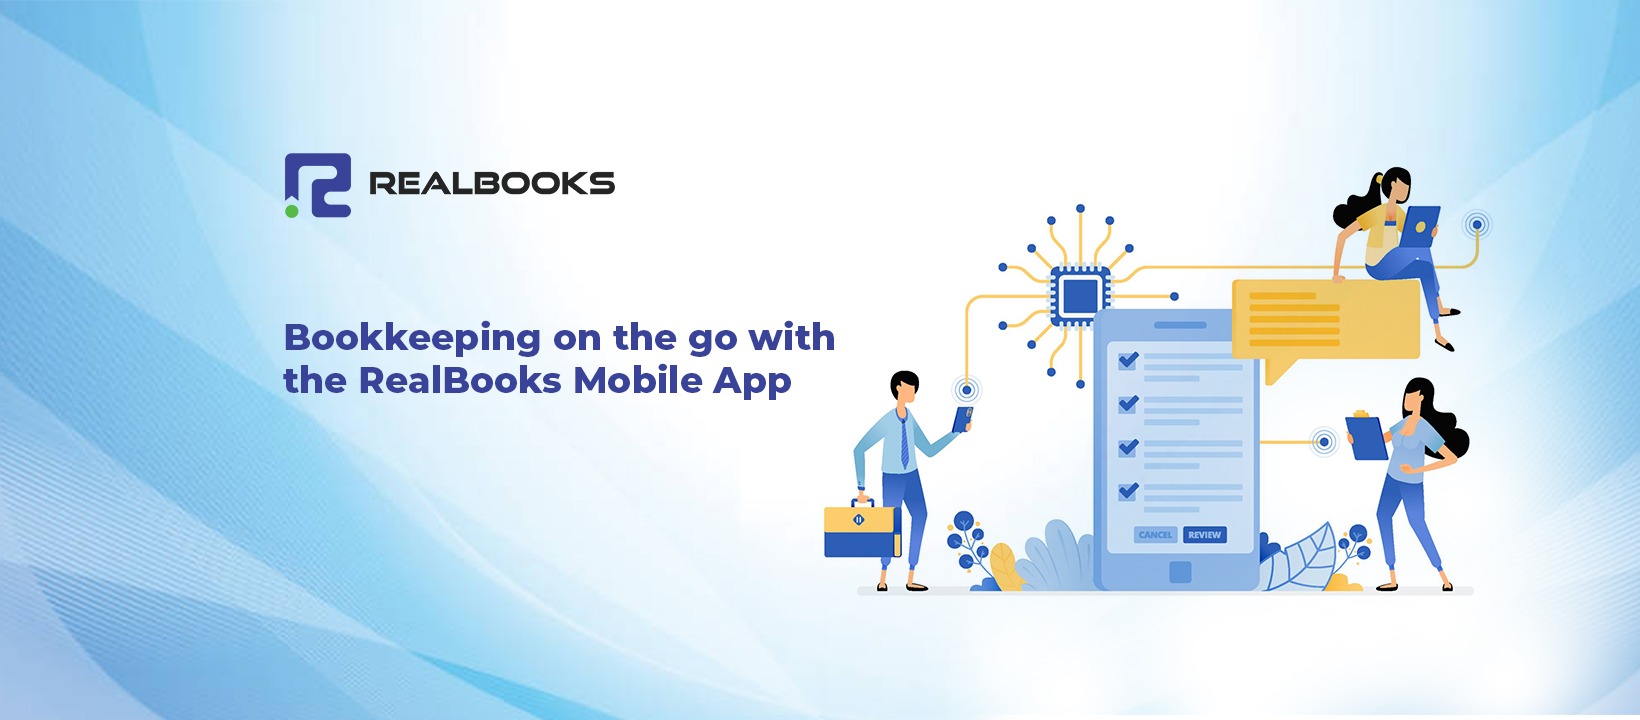 Run Your Business At Your Fingertips With The RealBooks Mobile App